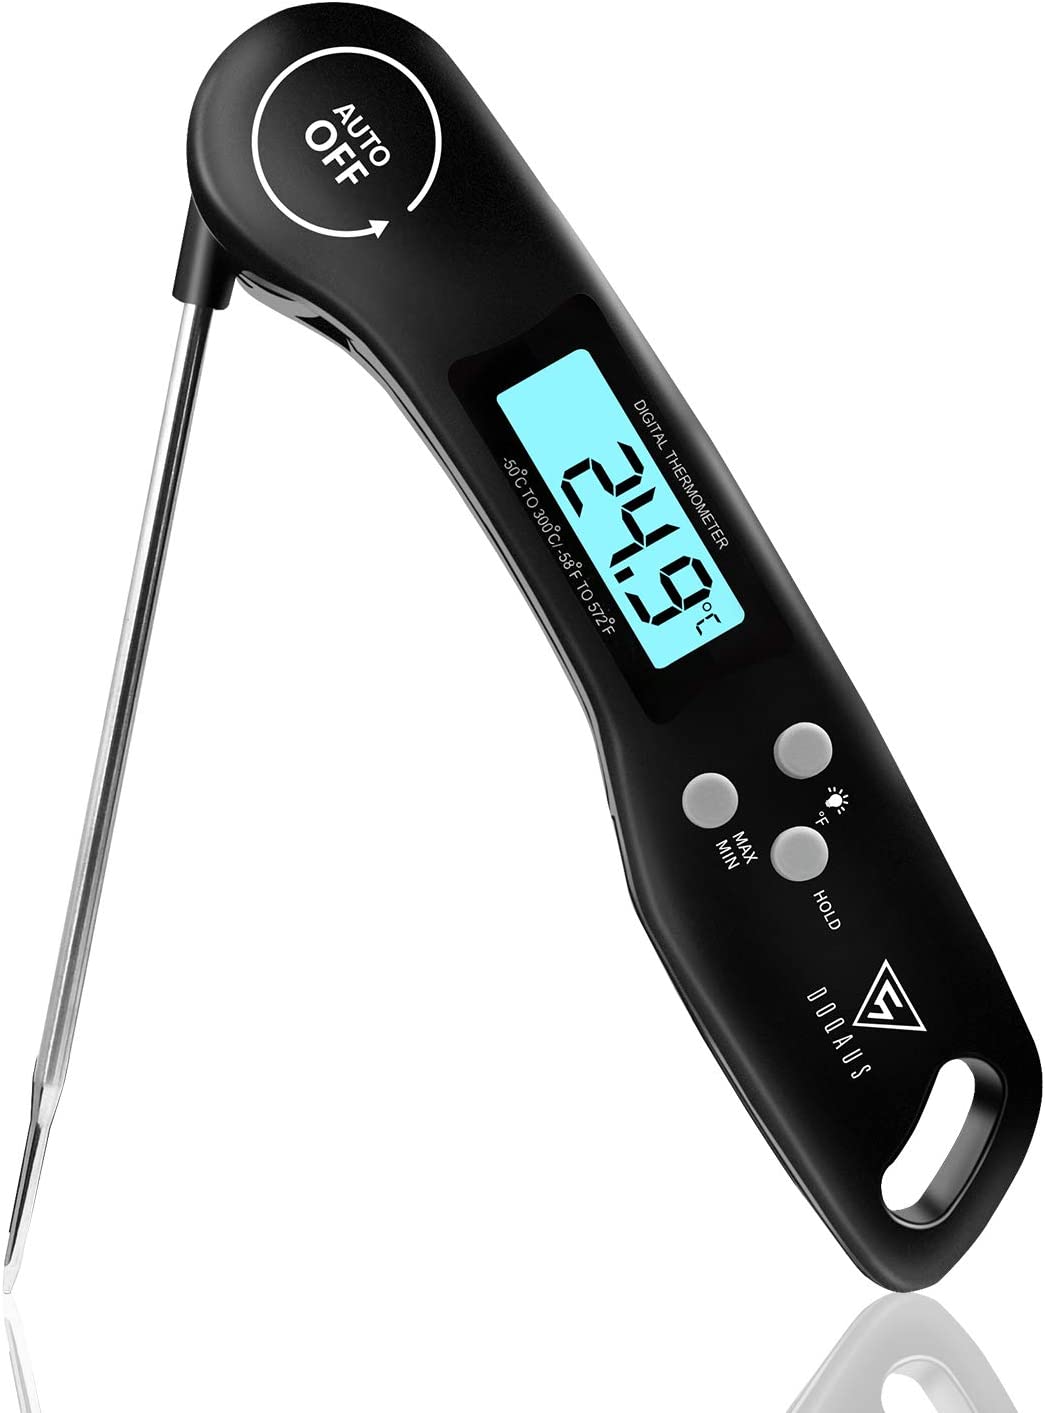 Meat Thermometer - The Original Forever Sharp Knife